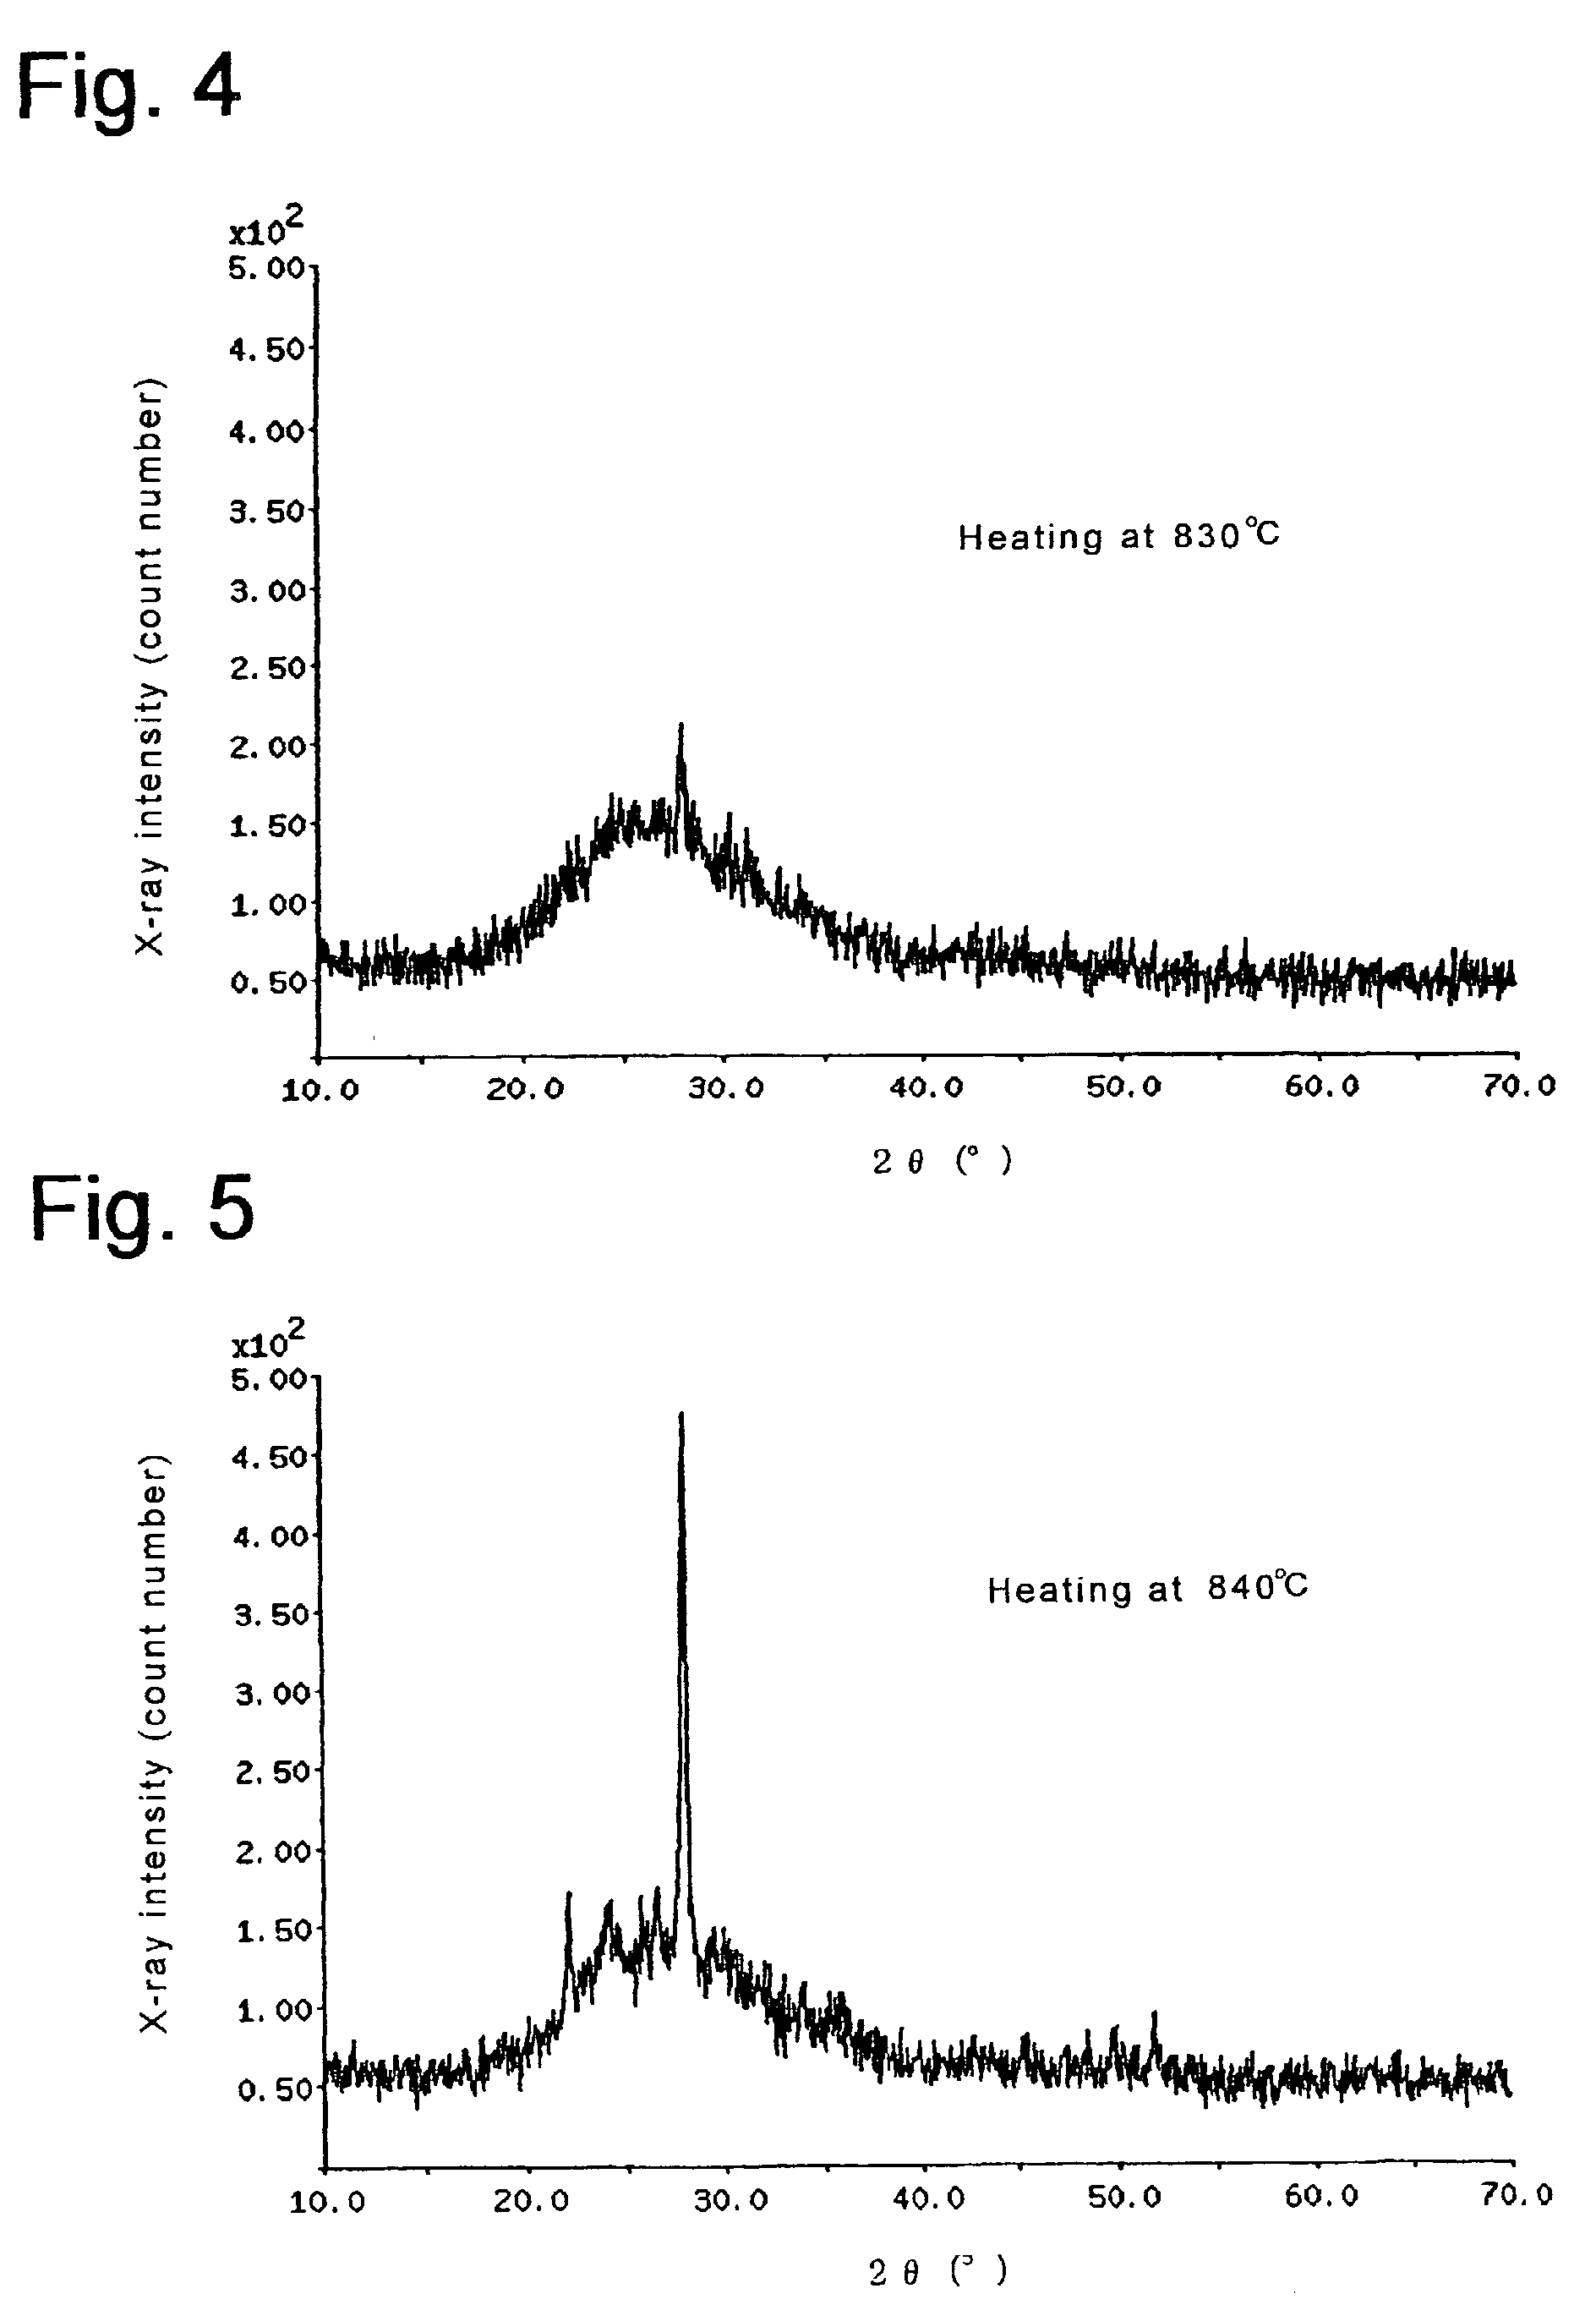 Jointed body of glass-ceramic and aluminum nitride sintered compact and method for producing the same